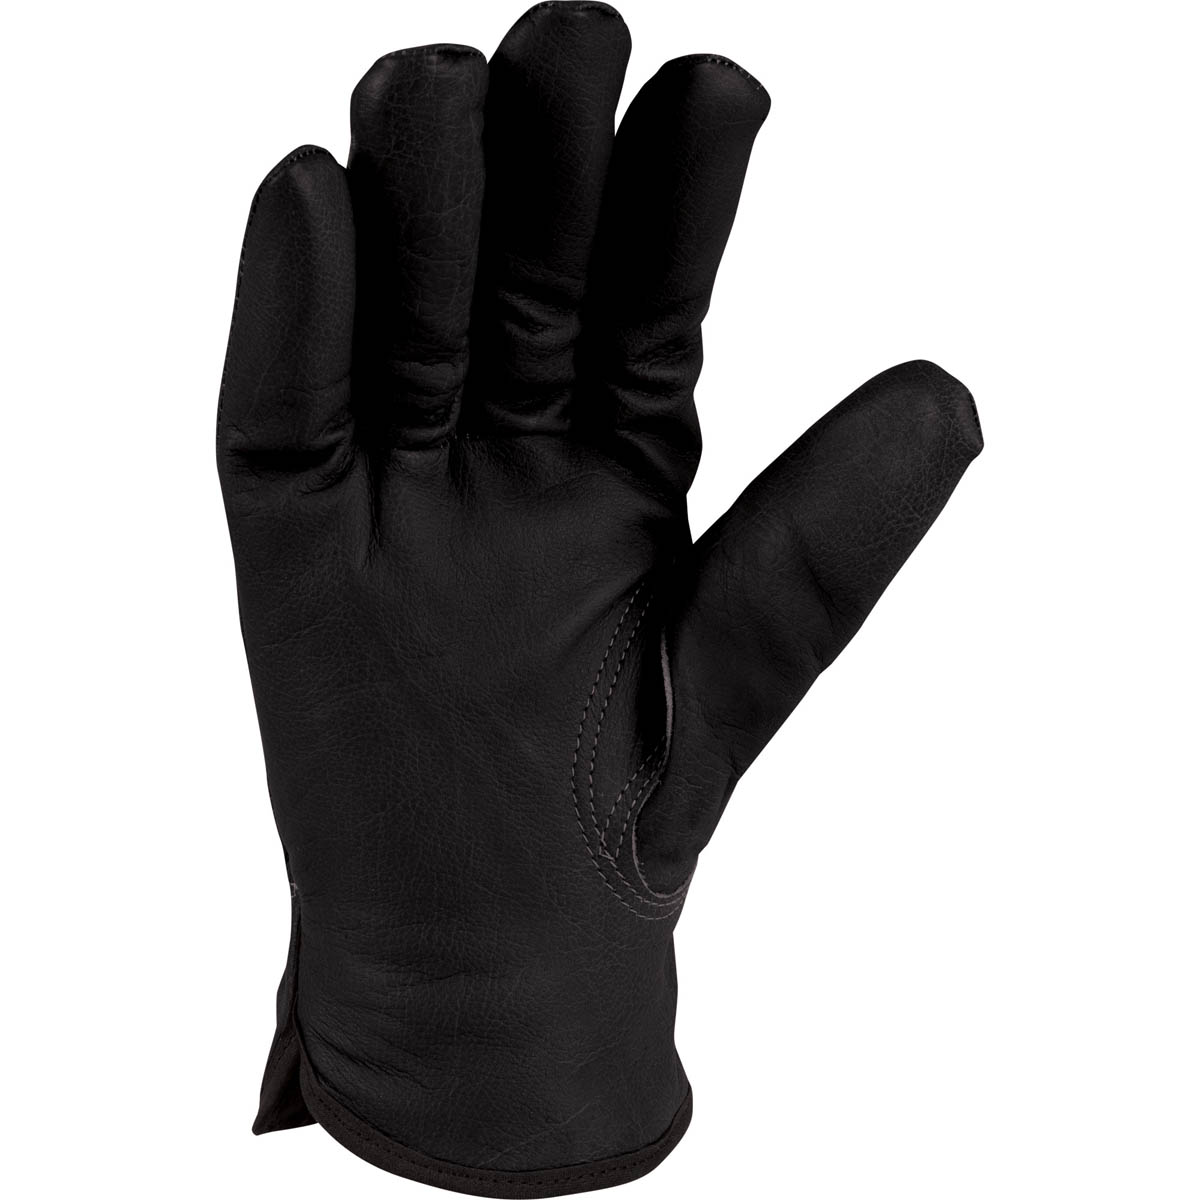 Carhartt Men's Insulated Leather Driver Glove